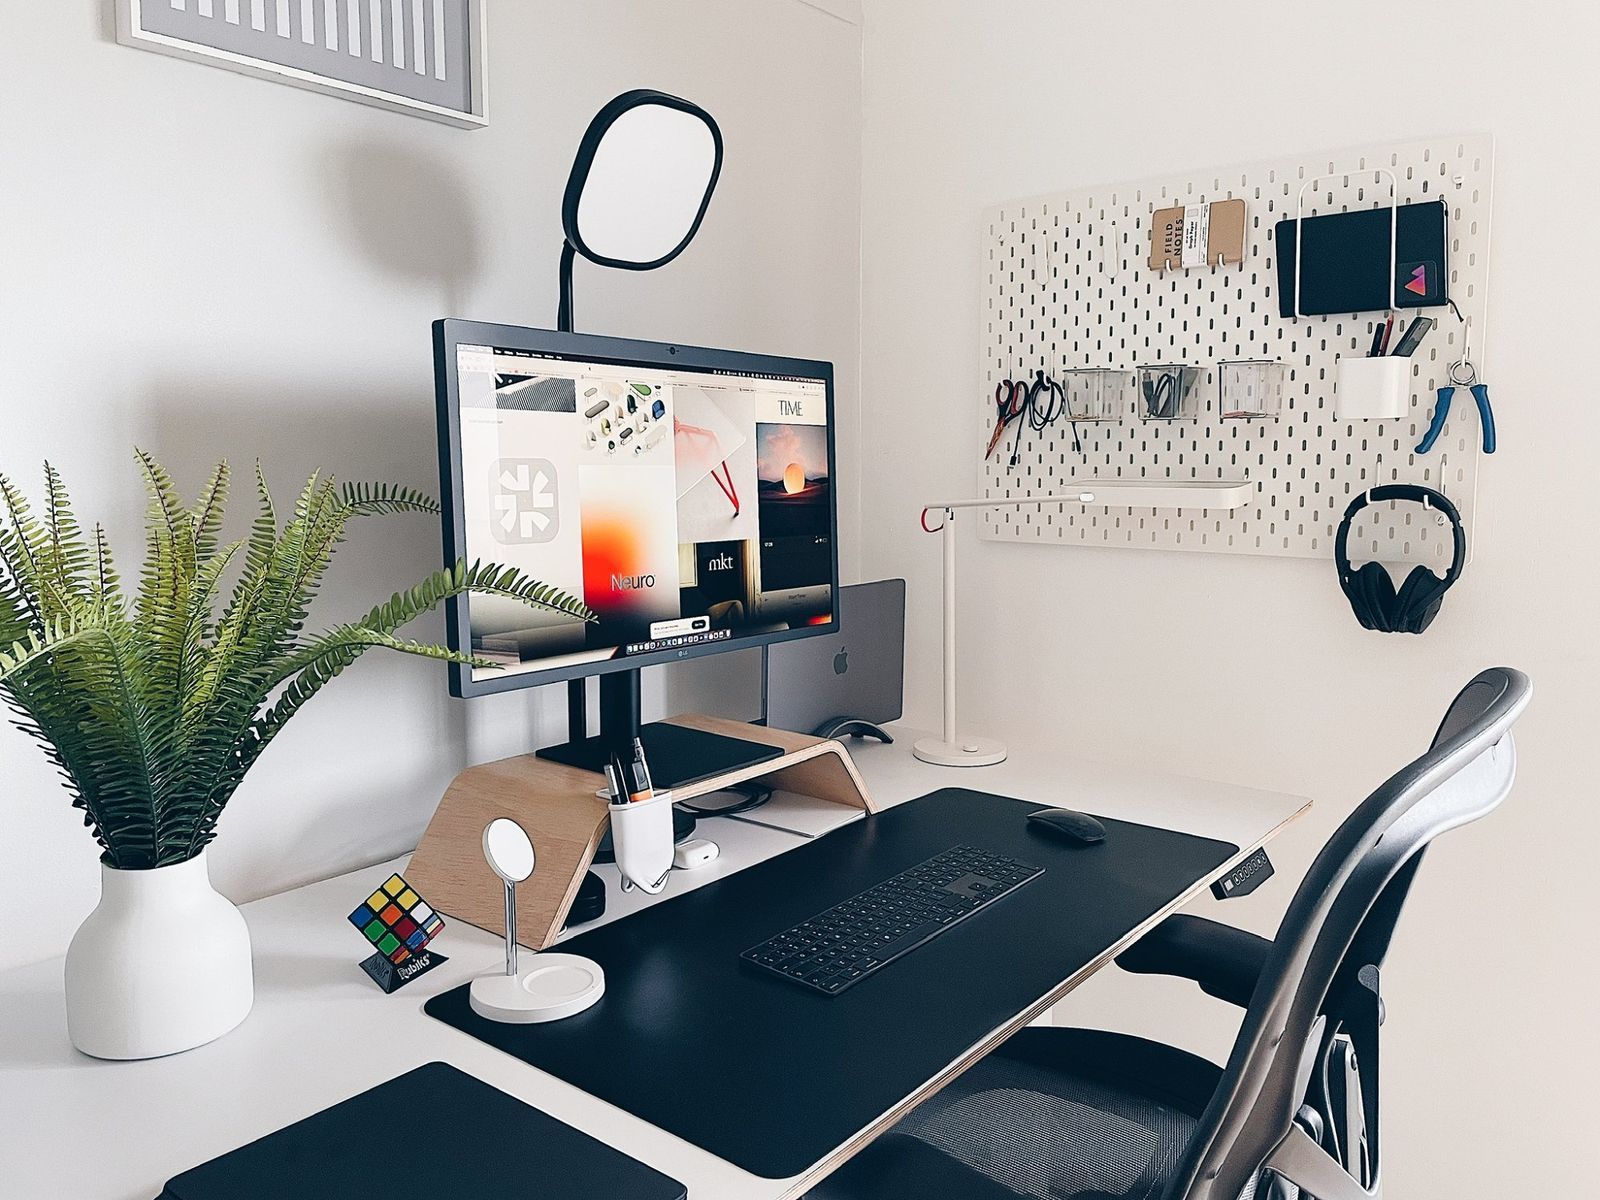 A bright and minimal home office with a white desk, ergonomic chair, raised computer monitor, pegboard organisation, and a vibrant fern plant